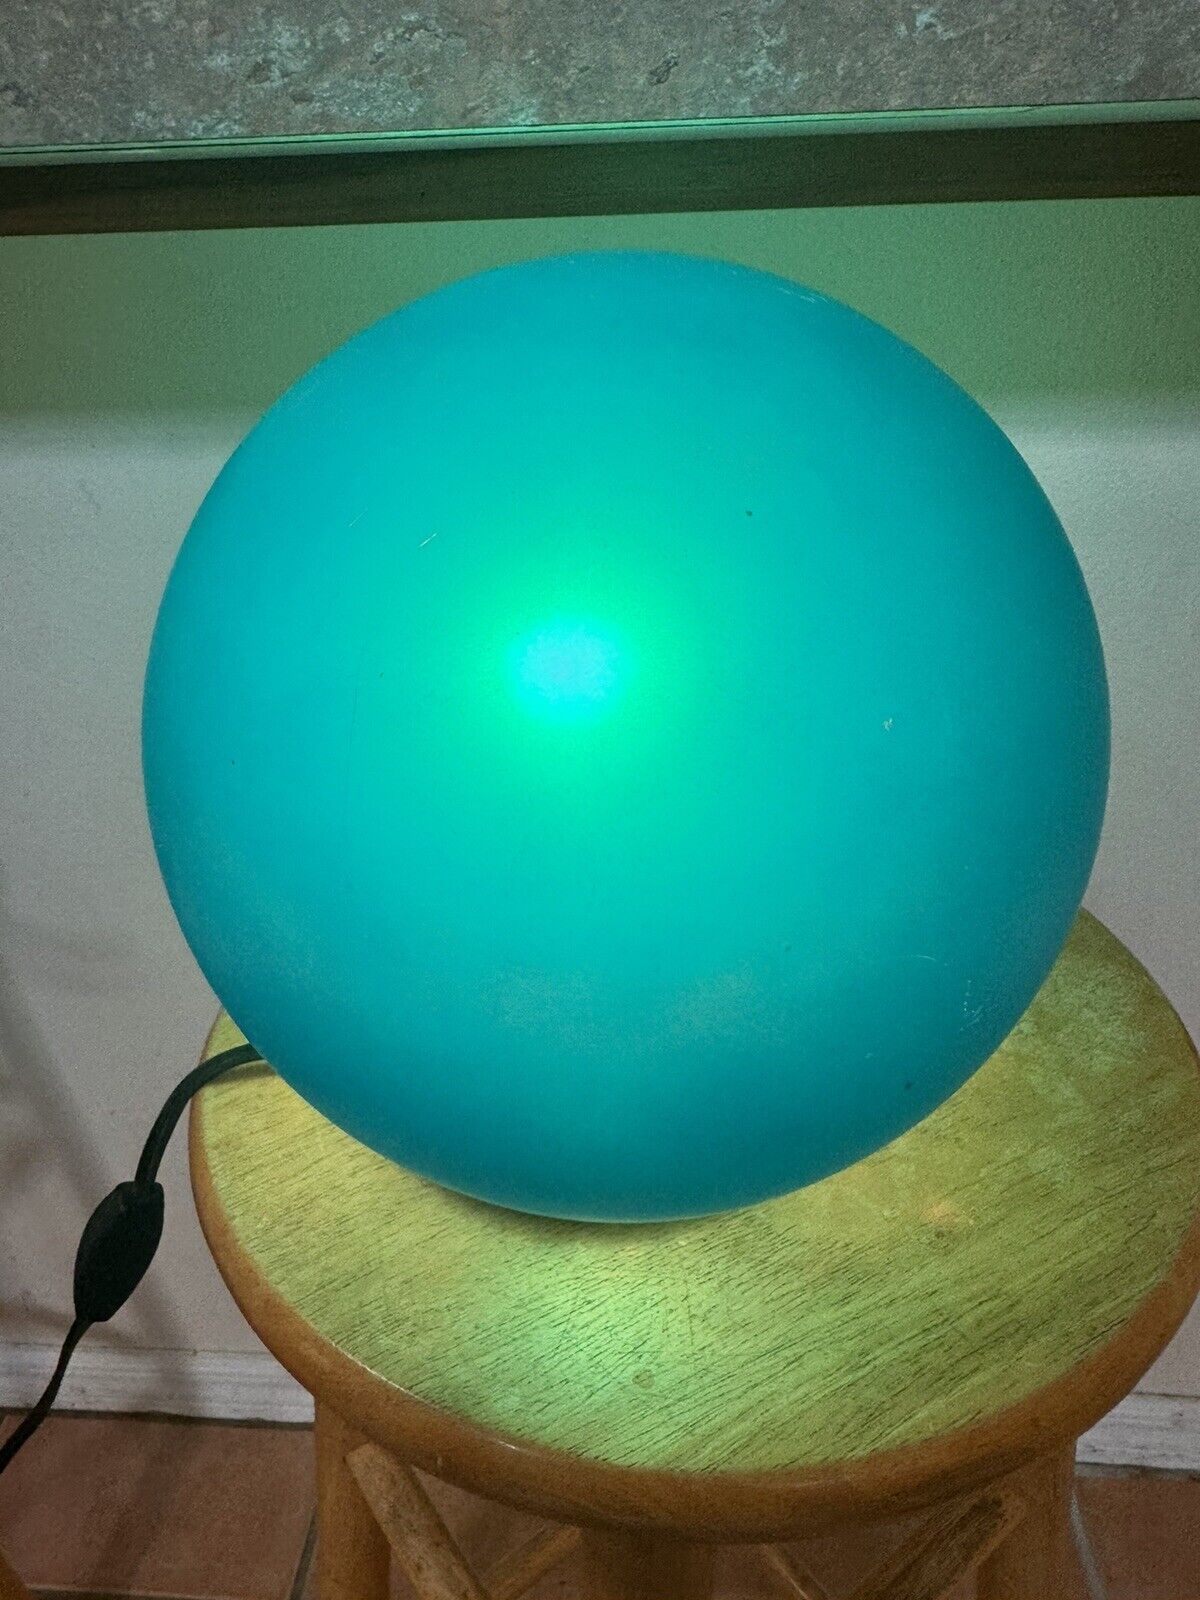 RARE 1990s Vintage Ikea Teal Blue Fado Round Orb Lamps- Discontinued